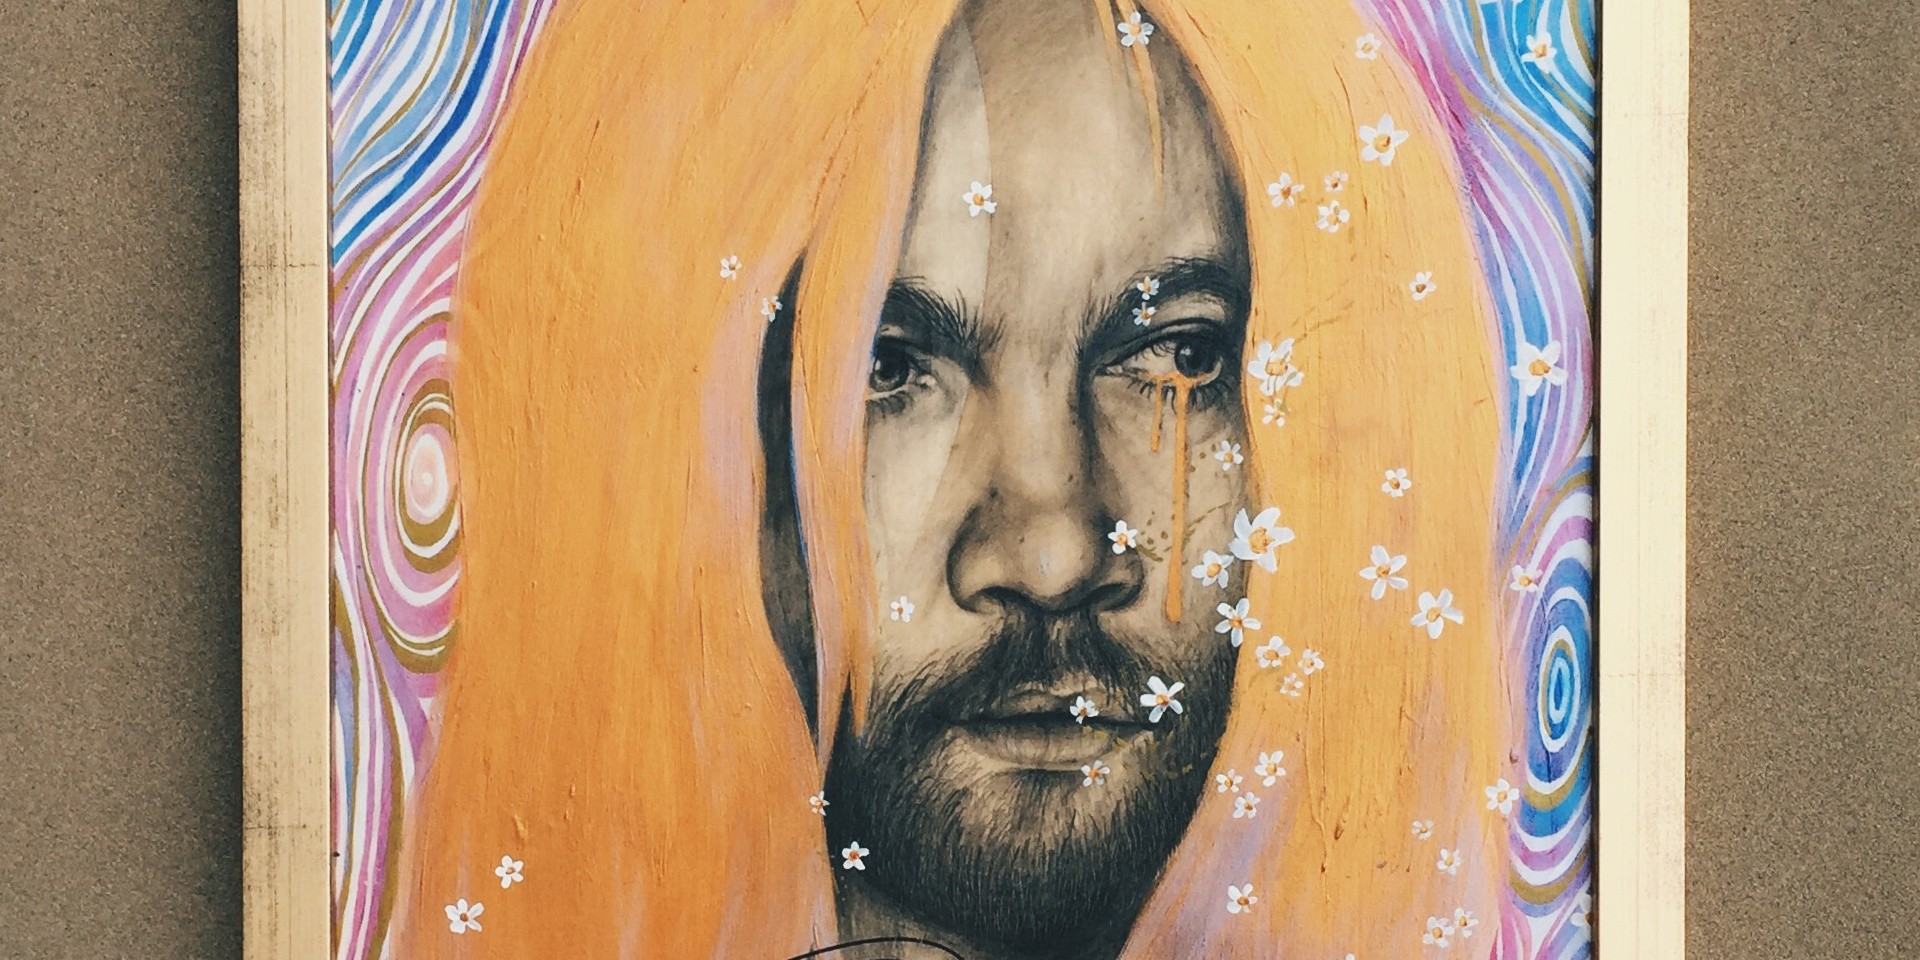 CONTEST: Win a signed portrait of Tame Impala's Kevin Parker by Samantha Rui